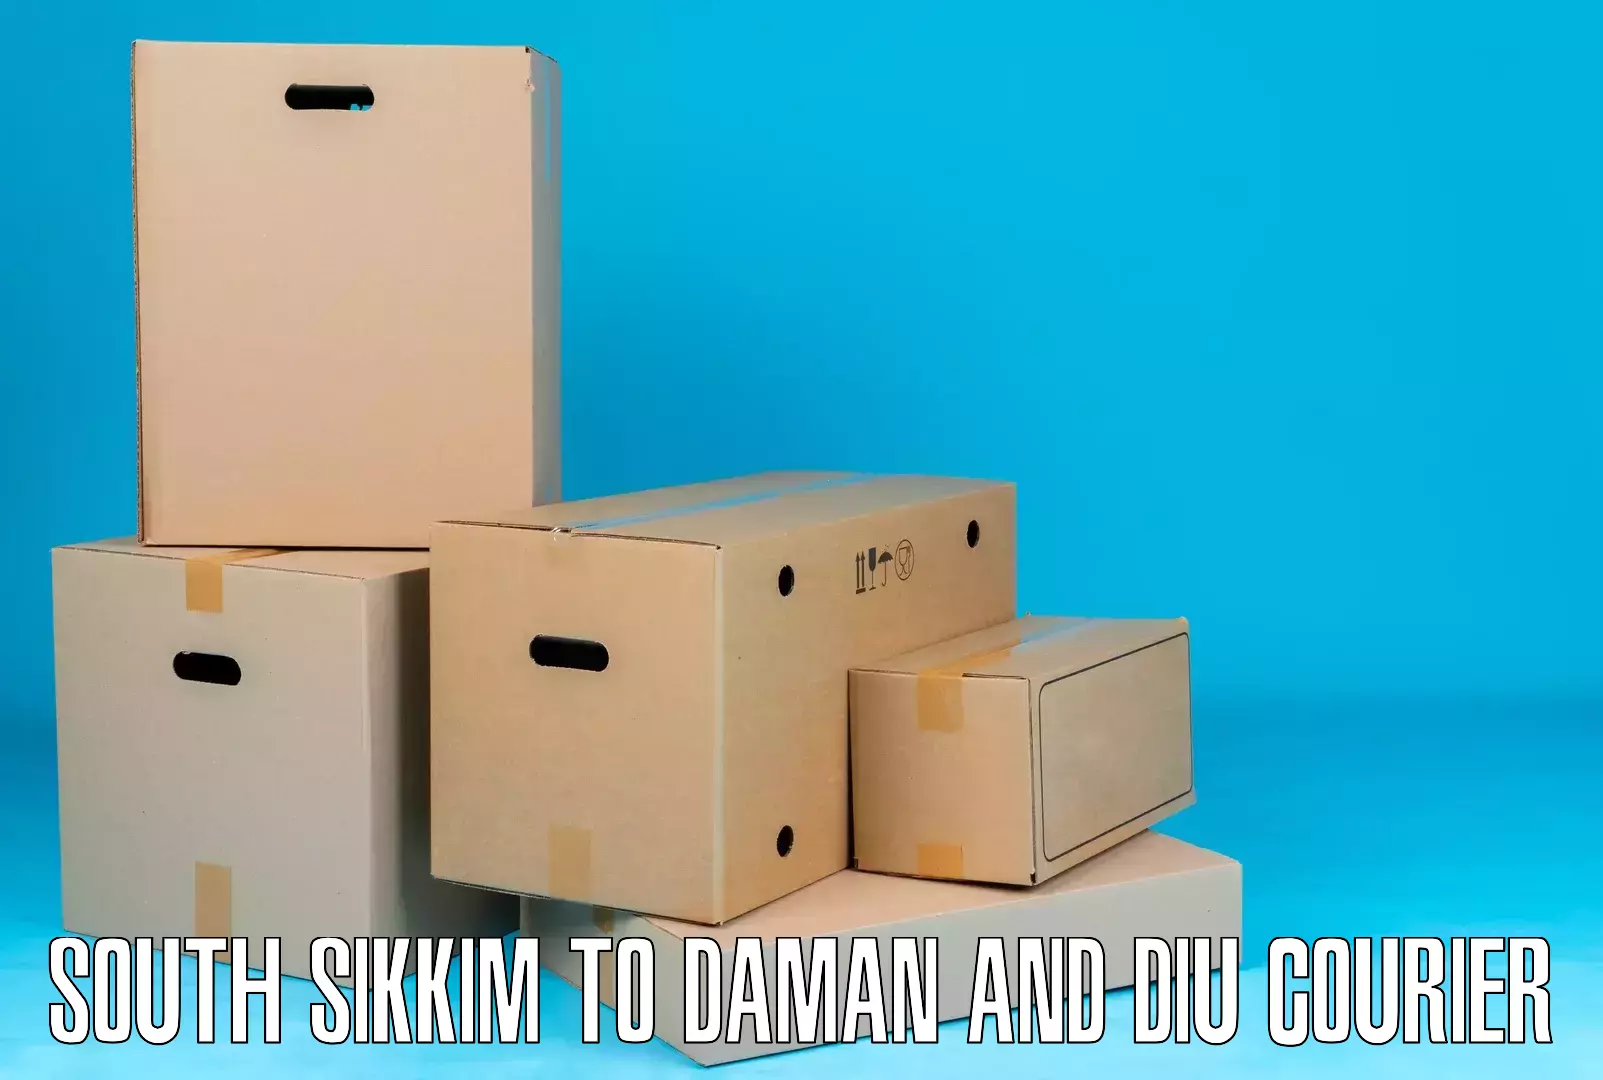 Courier services South Sikkim to Daman and Diu